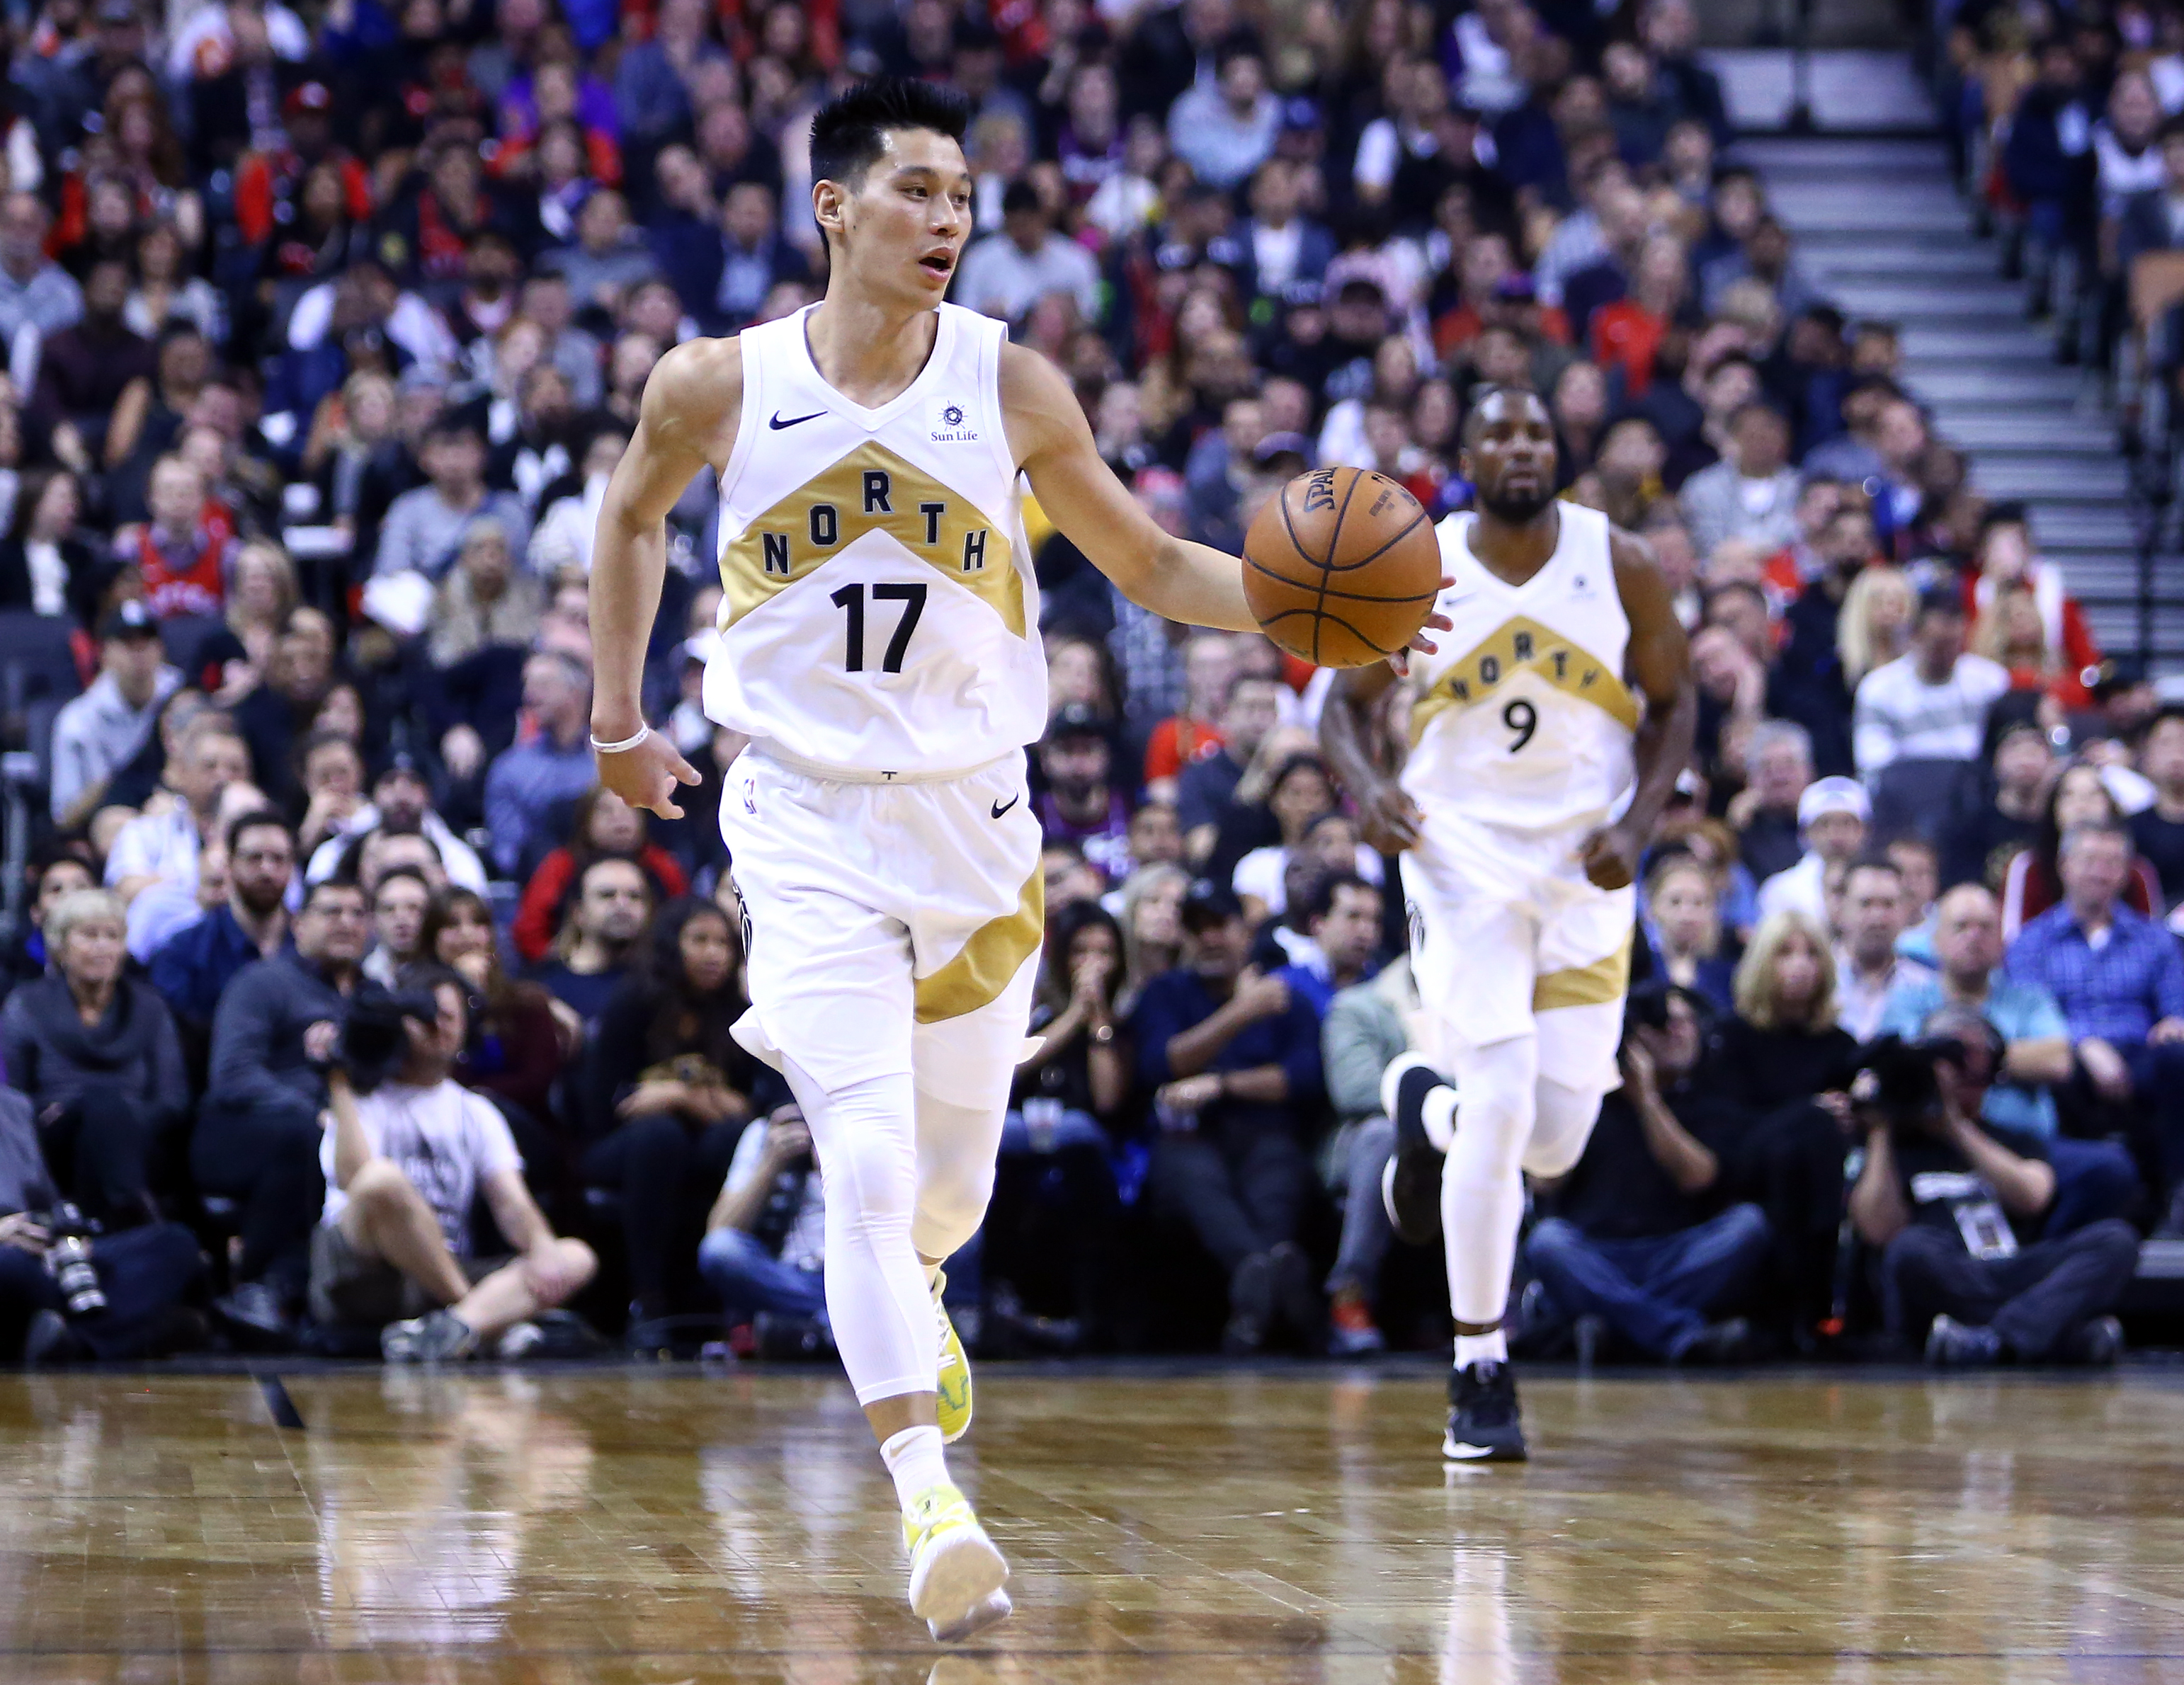 While Yao Ming and Jeremy Lin are two of the most recognizable Asian NBA players of all time, are there are Asian players in the NBA today?